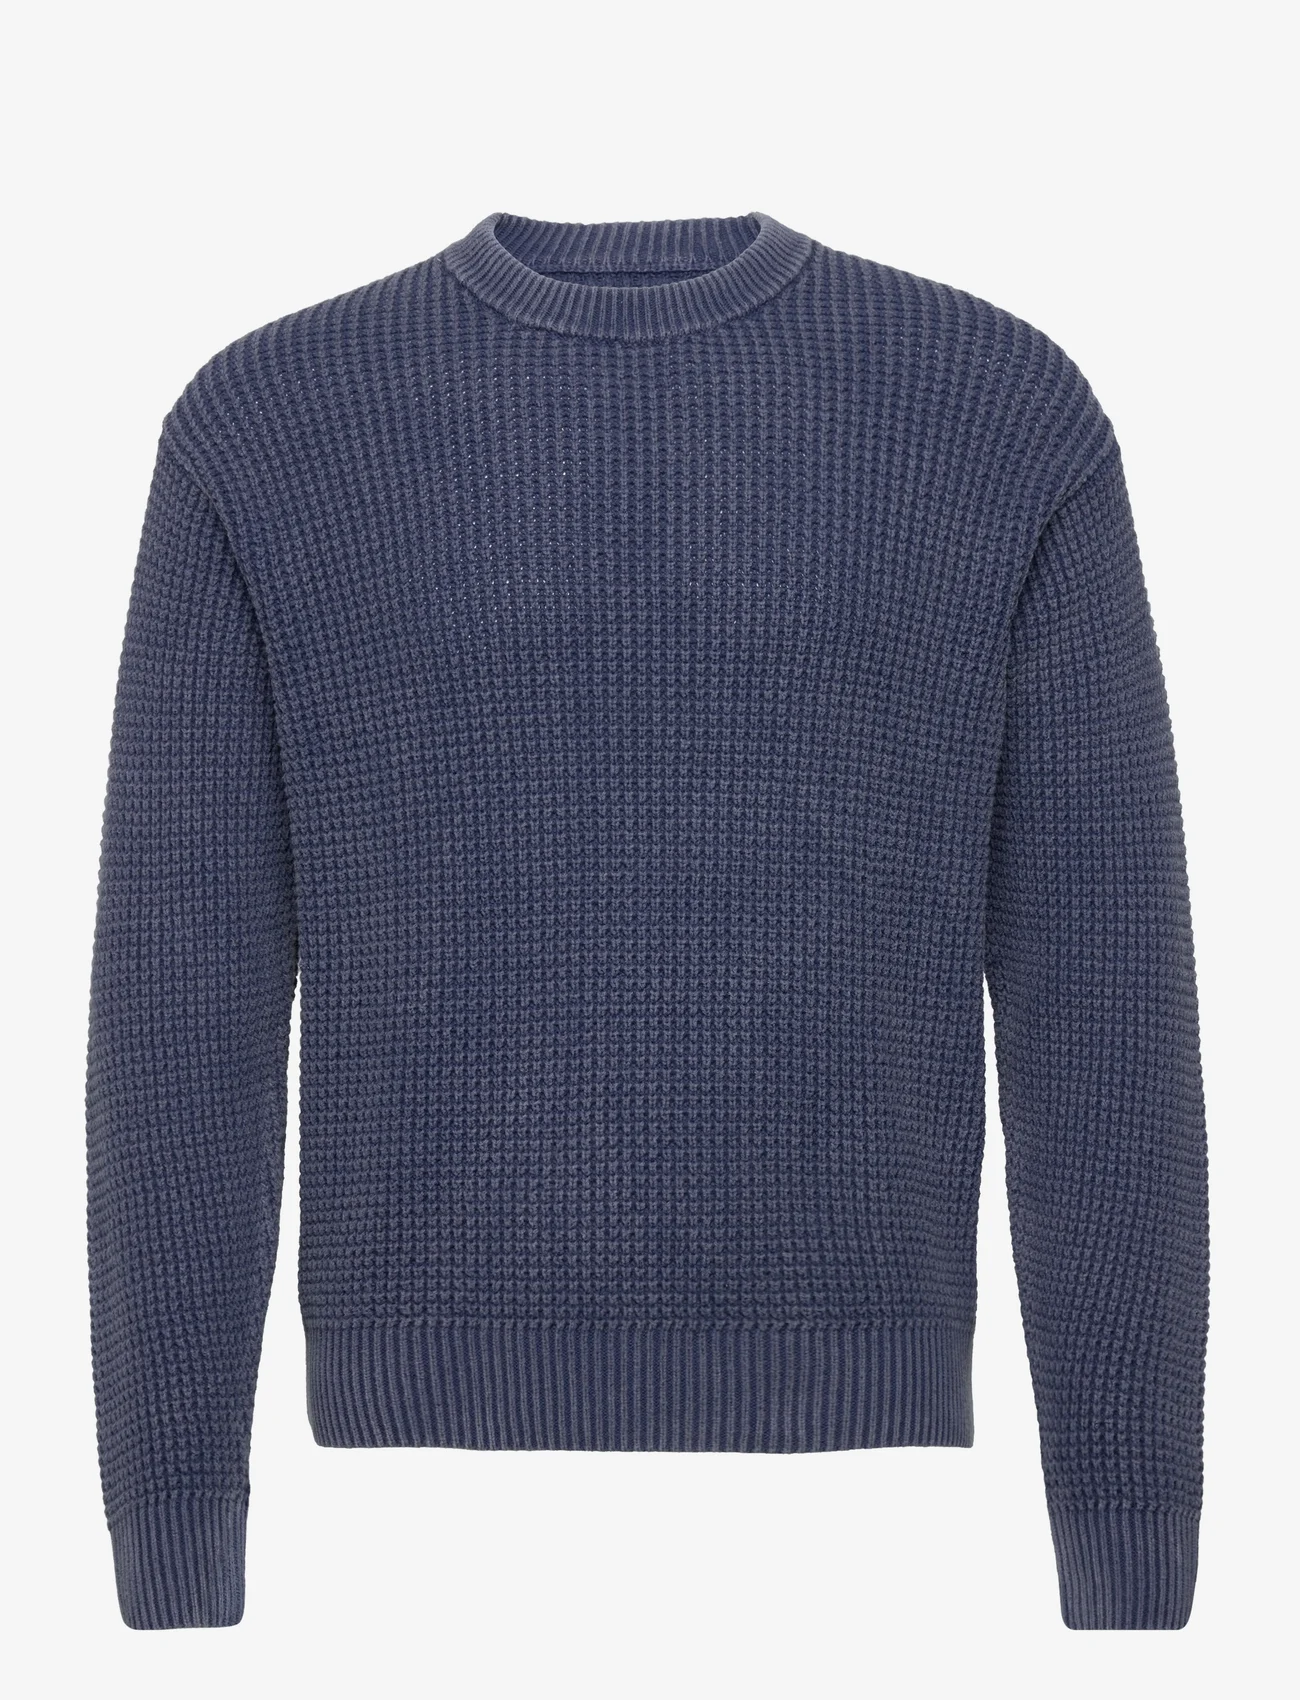 Abercrombie & Fitch - ANF MENS SWEATERS - basic-strickmode - navy - 0